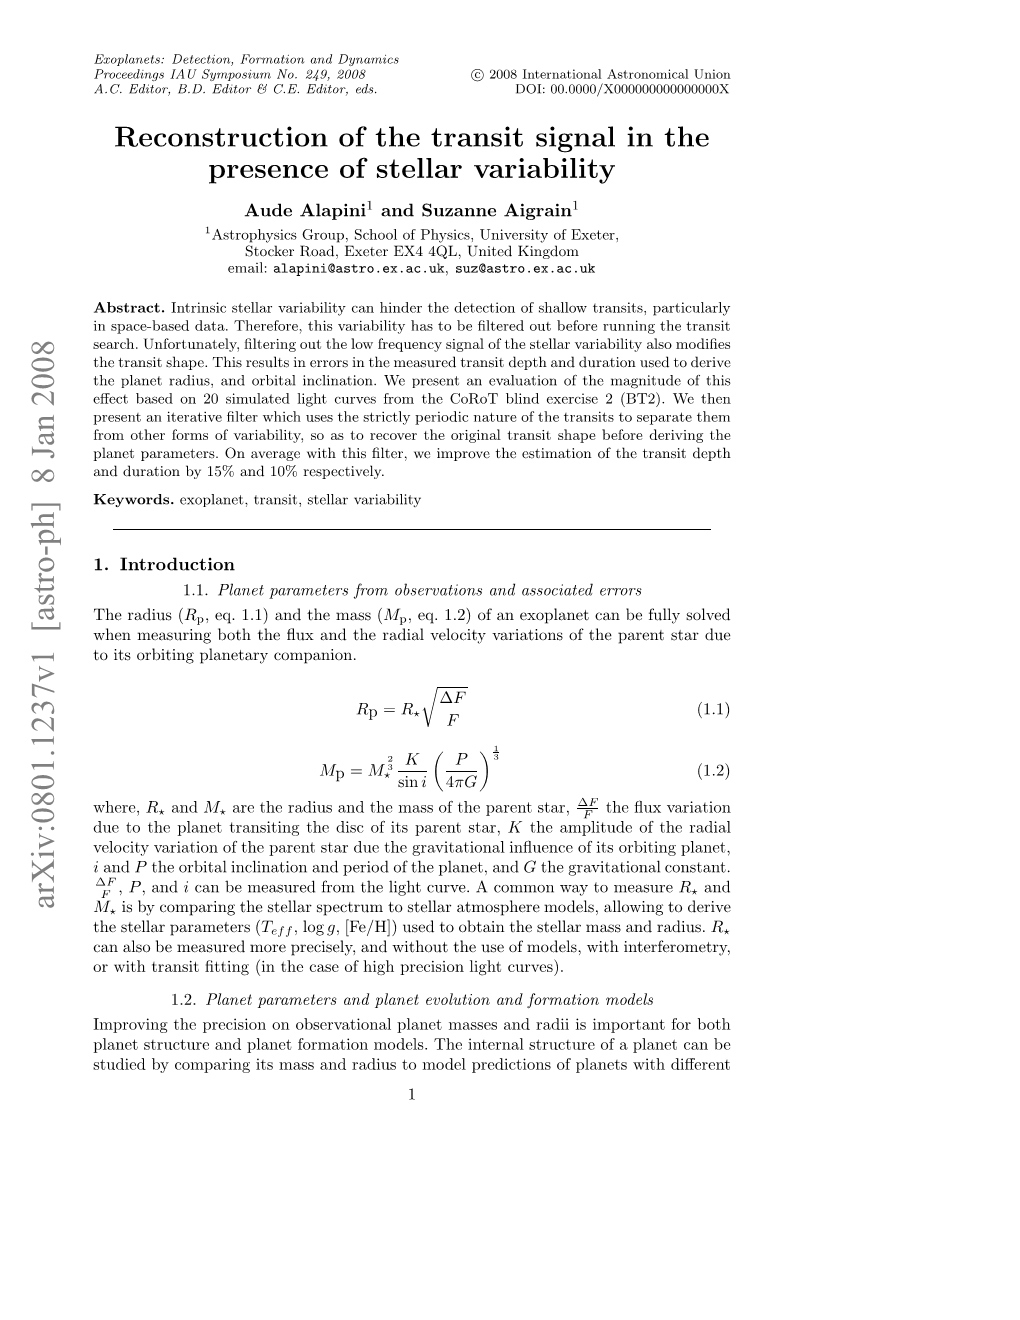 Reconstruction of the Transit Signal in the Presence of Stellar Variability